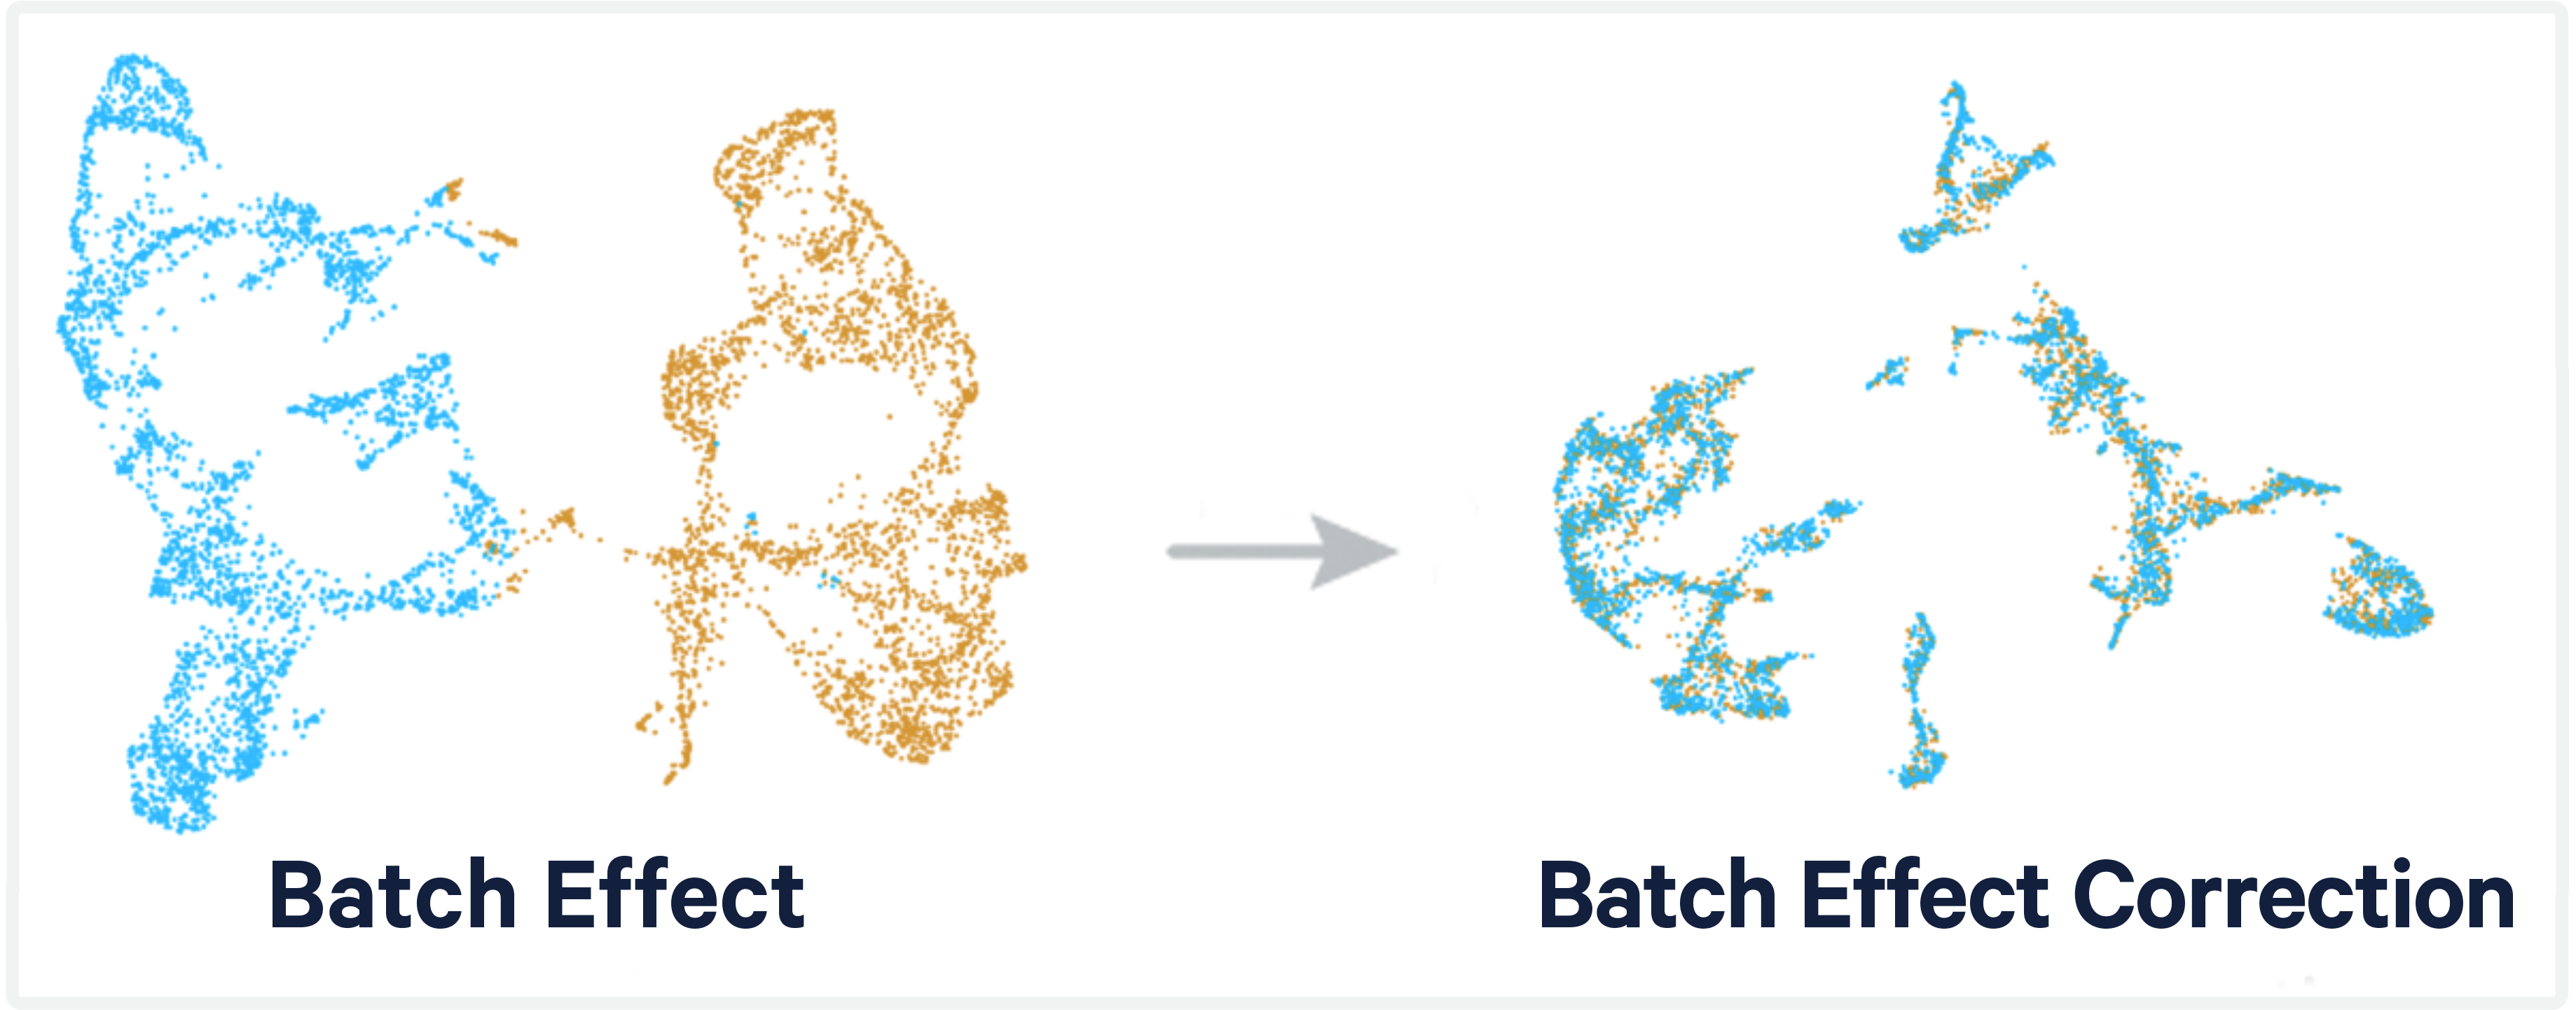 Understanding and Tackling Batch Effects in Single-Cell RNA-Seq Analysis